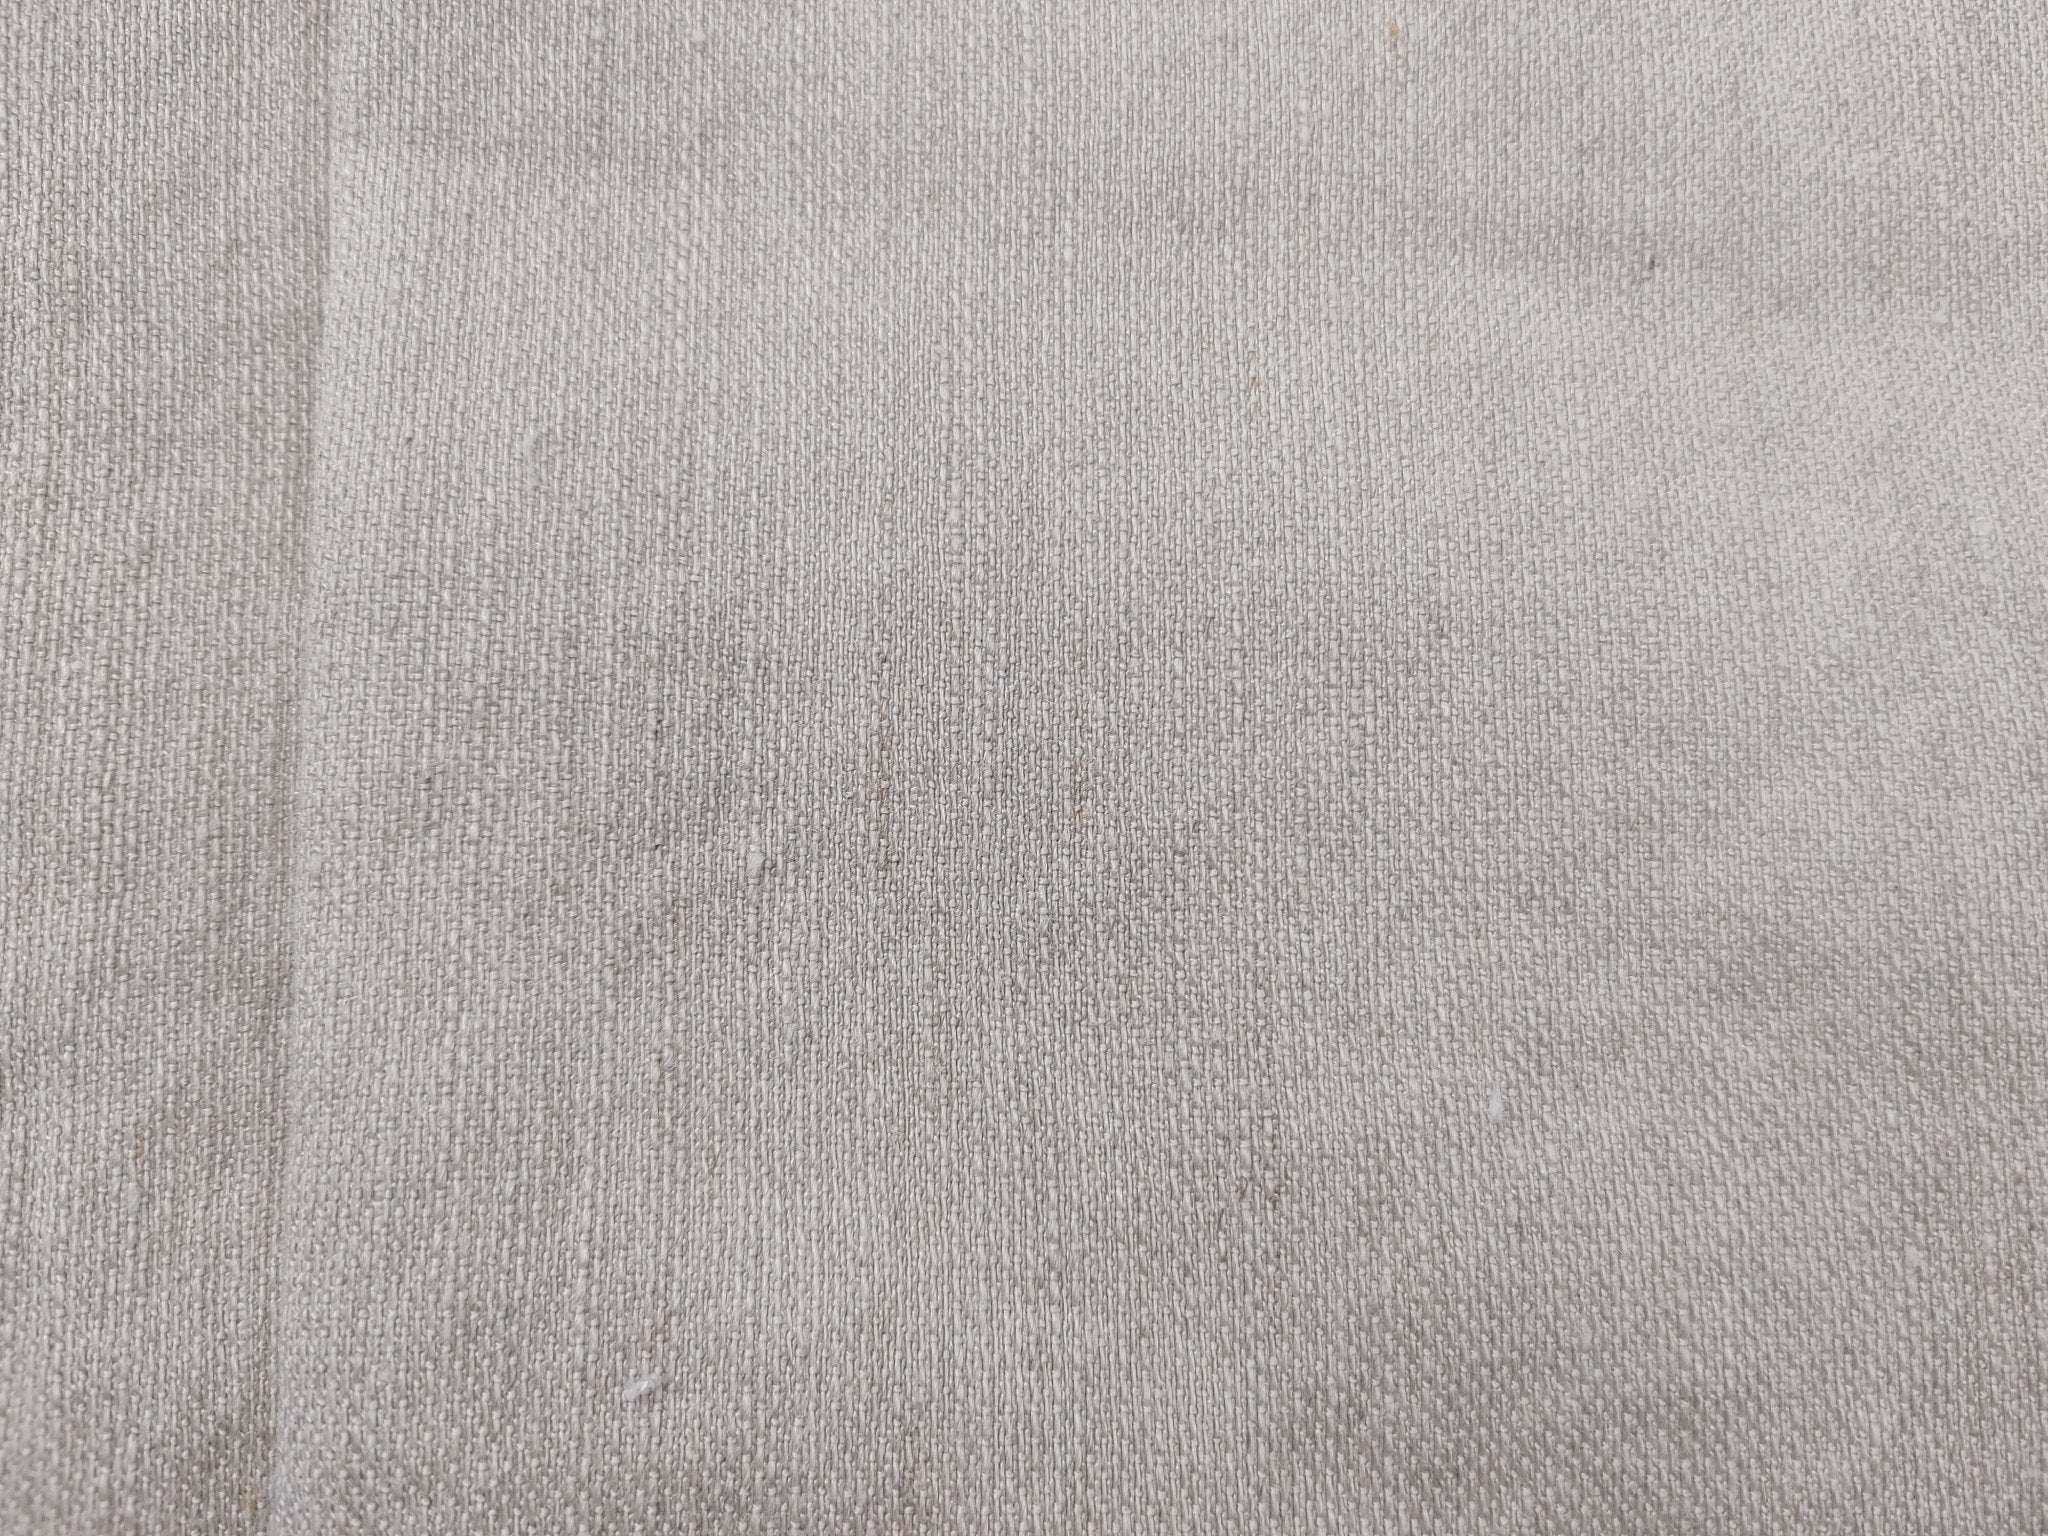 Linen Rayon PU Stretch Dobby Weave Fabric 6643 6644 - The Linen Lab - Natural